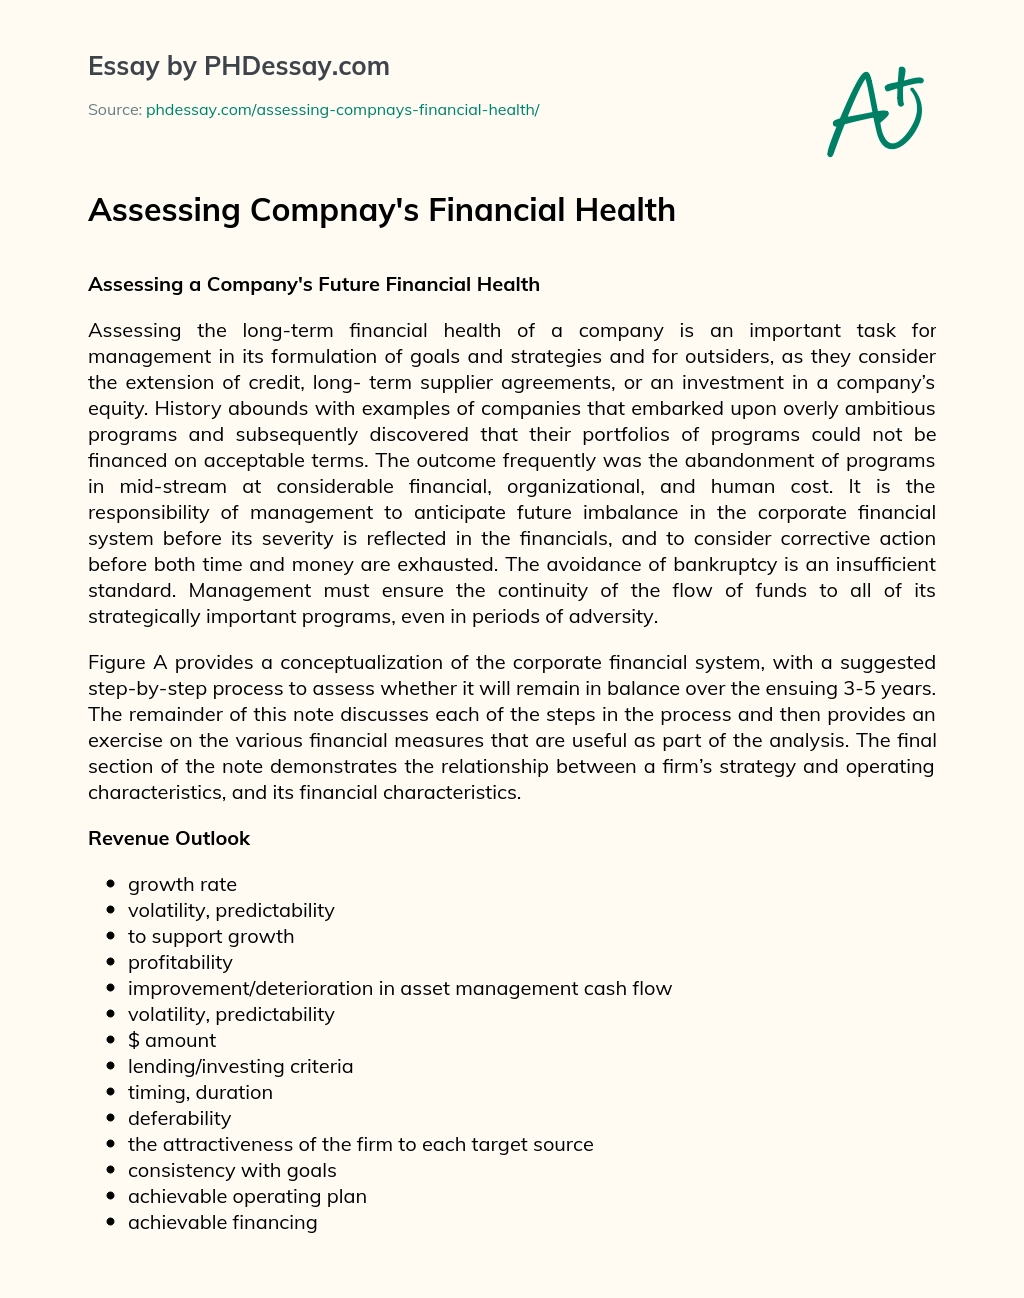 Assessing Compnay’s Financial Health essay